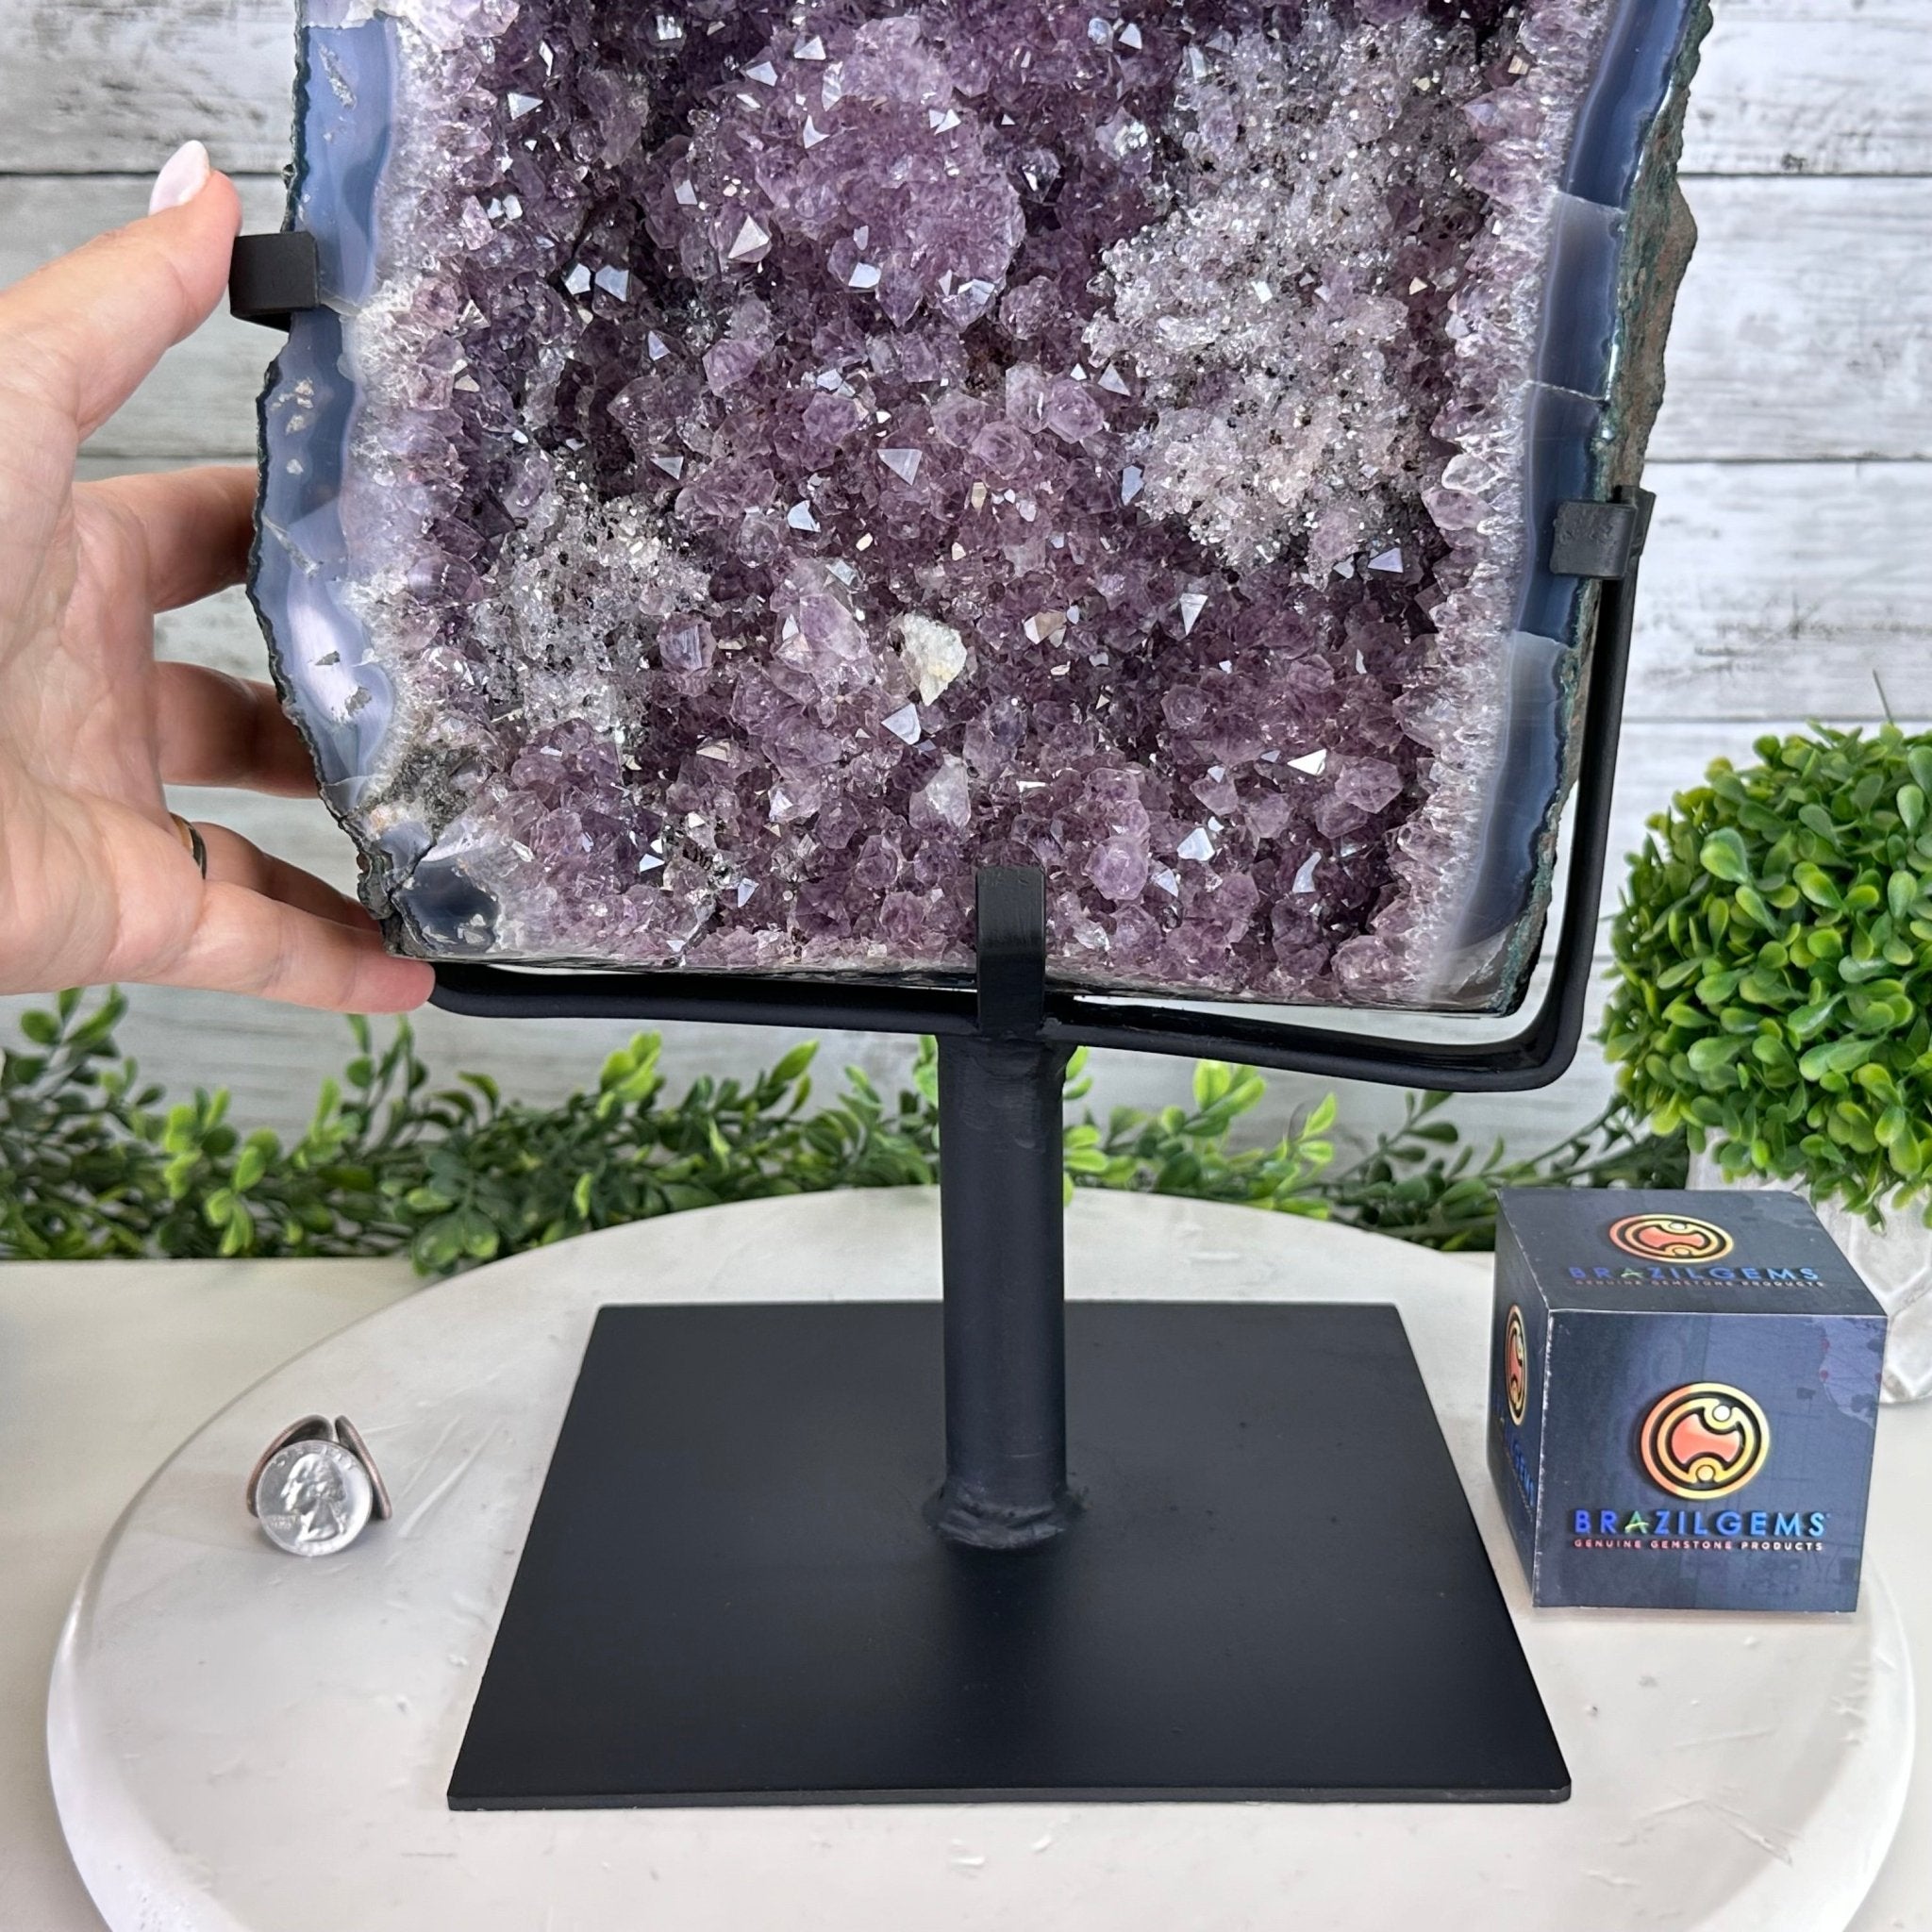 Amethyst Cluster on a Metal Base, 39.9 lbs & 20.5" Tall #5491 - 0107 - Brazil GemsBrazil GemsAmethyst Cluster on a Metal Base, 39.9 lbs & 20.5" Tall #5491 - 0107Clusters on Fixed Bases5491 - 0107